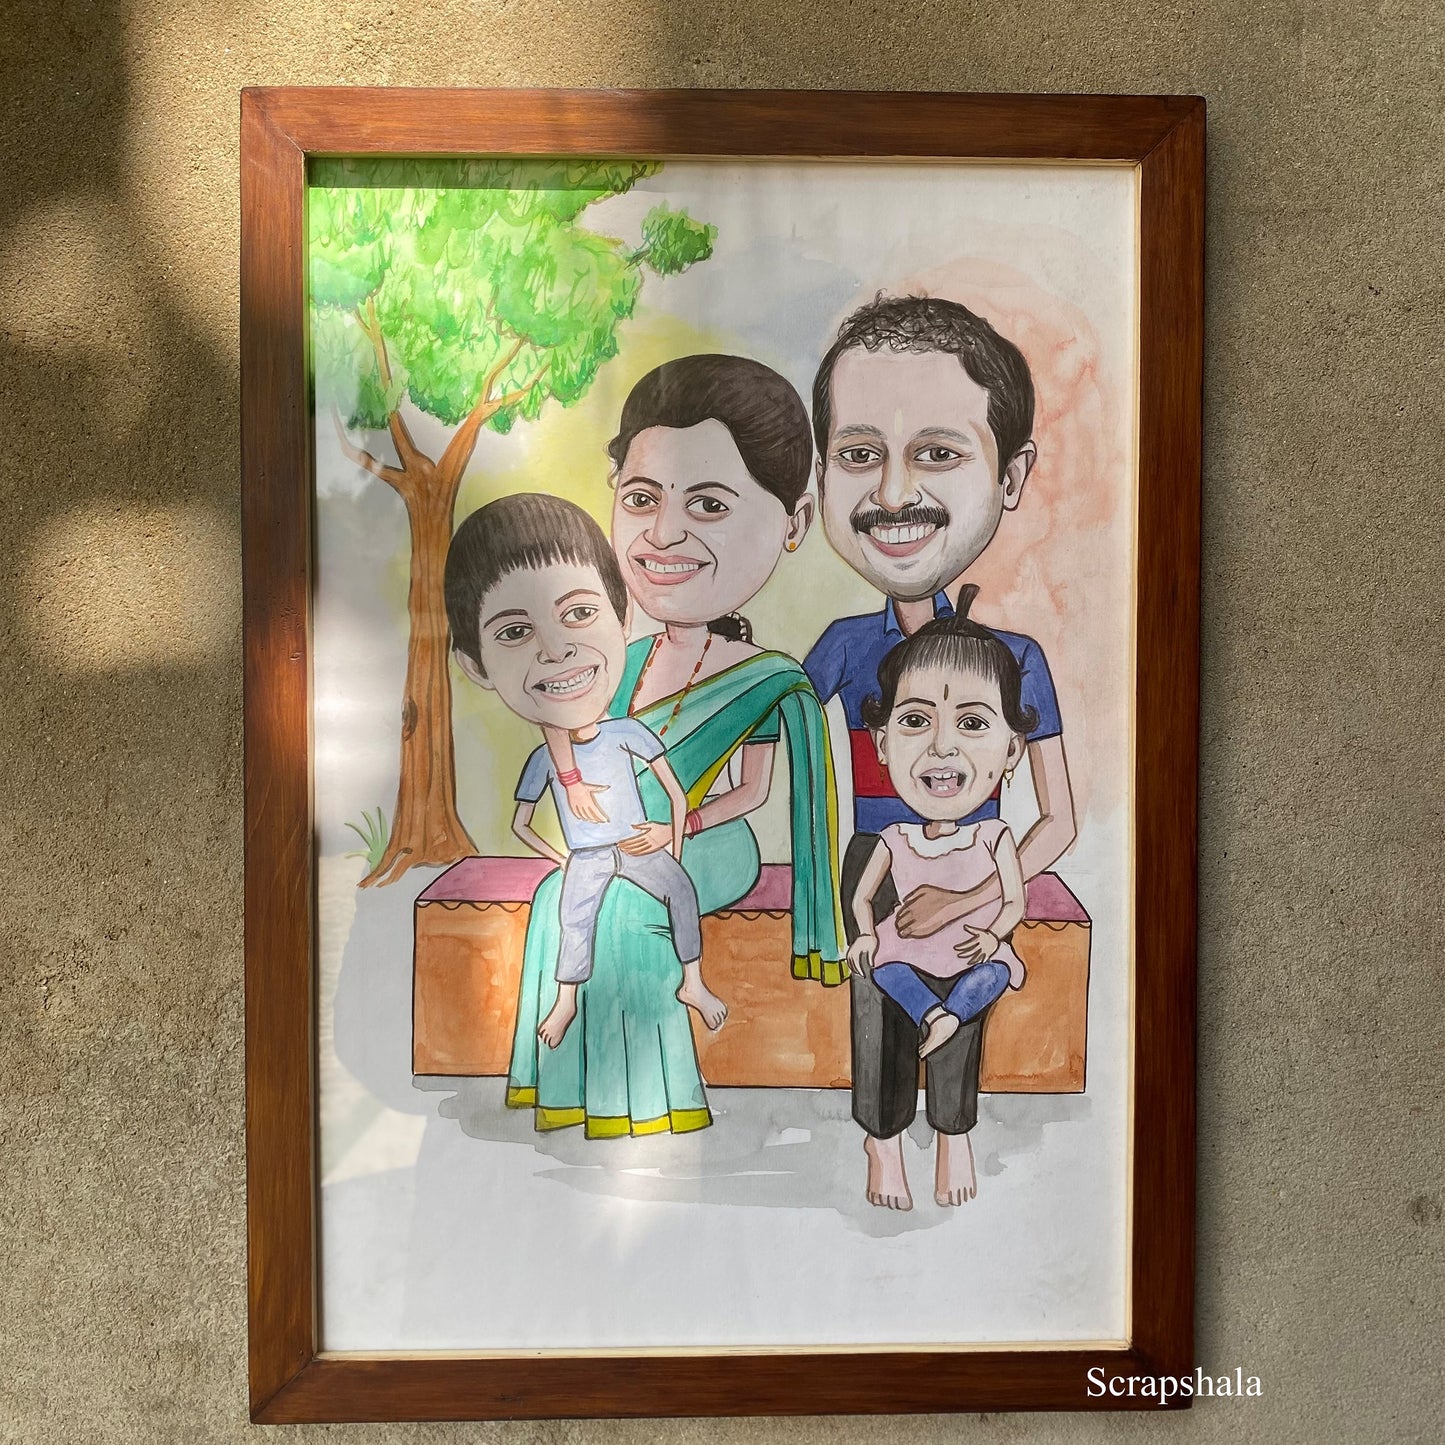 Caricature Framed Wall Hanging | Handpainted | Personalized | Natural wooden frame | Scrapshala